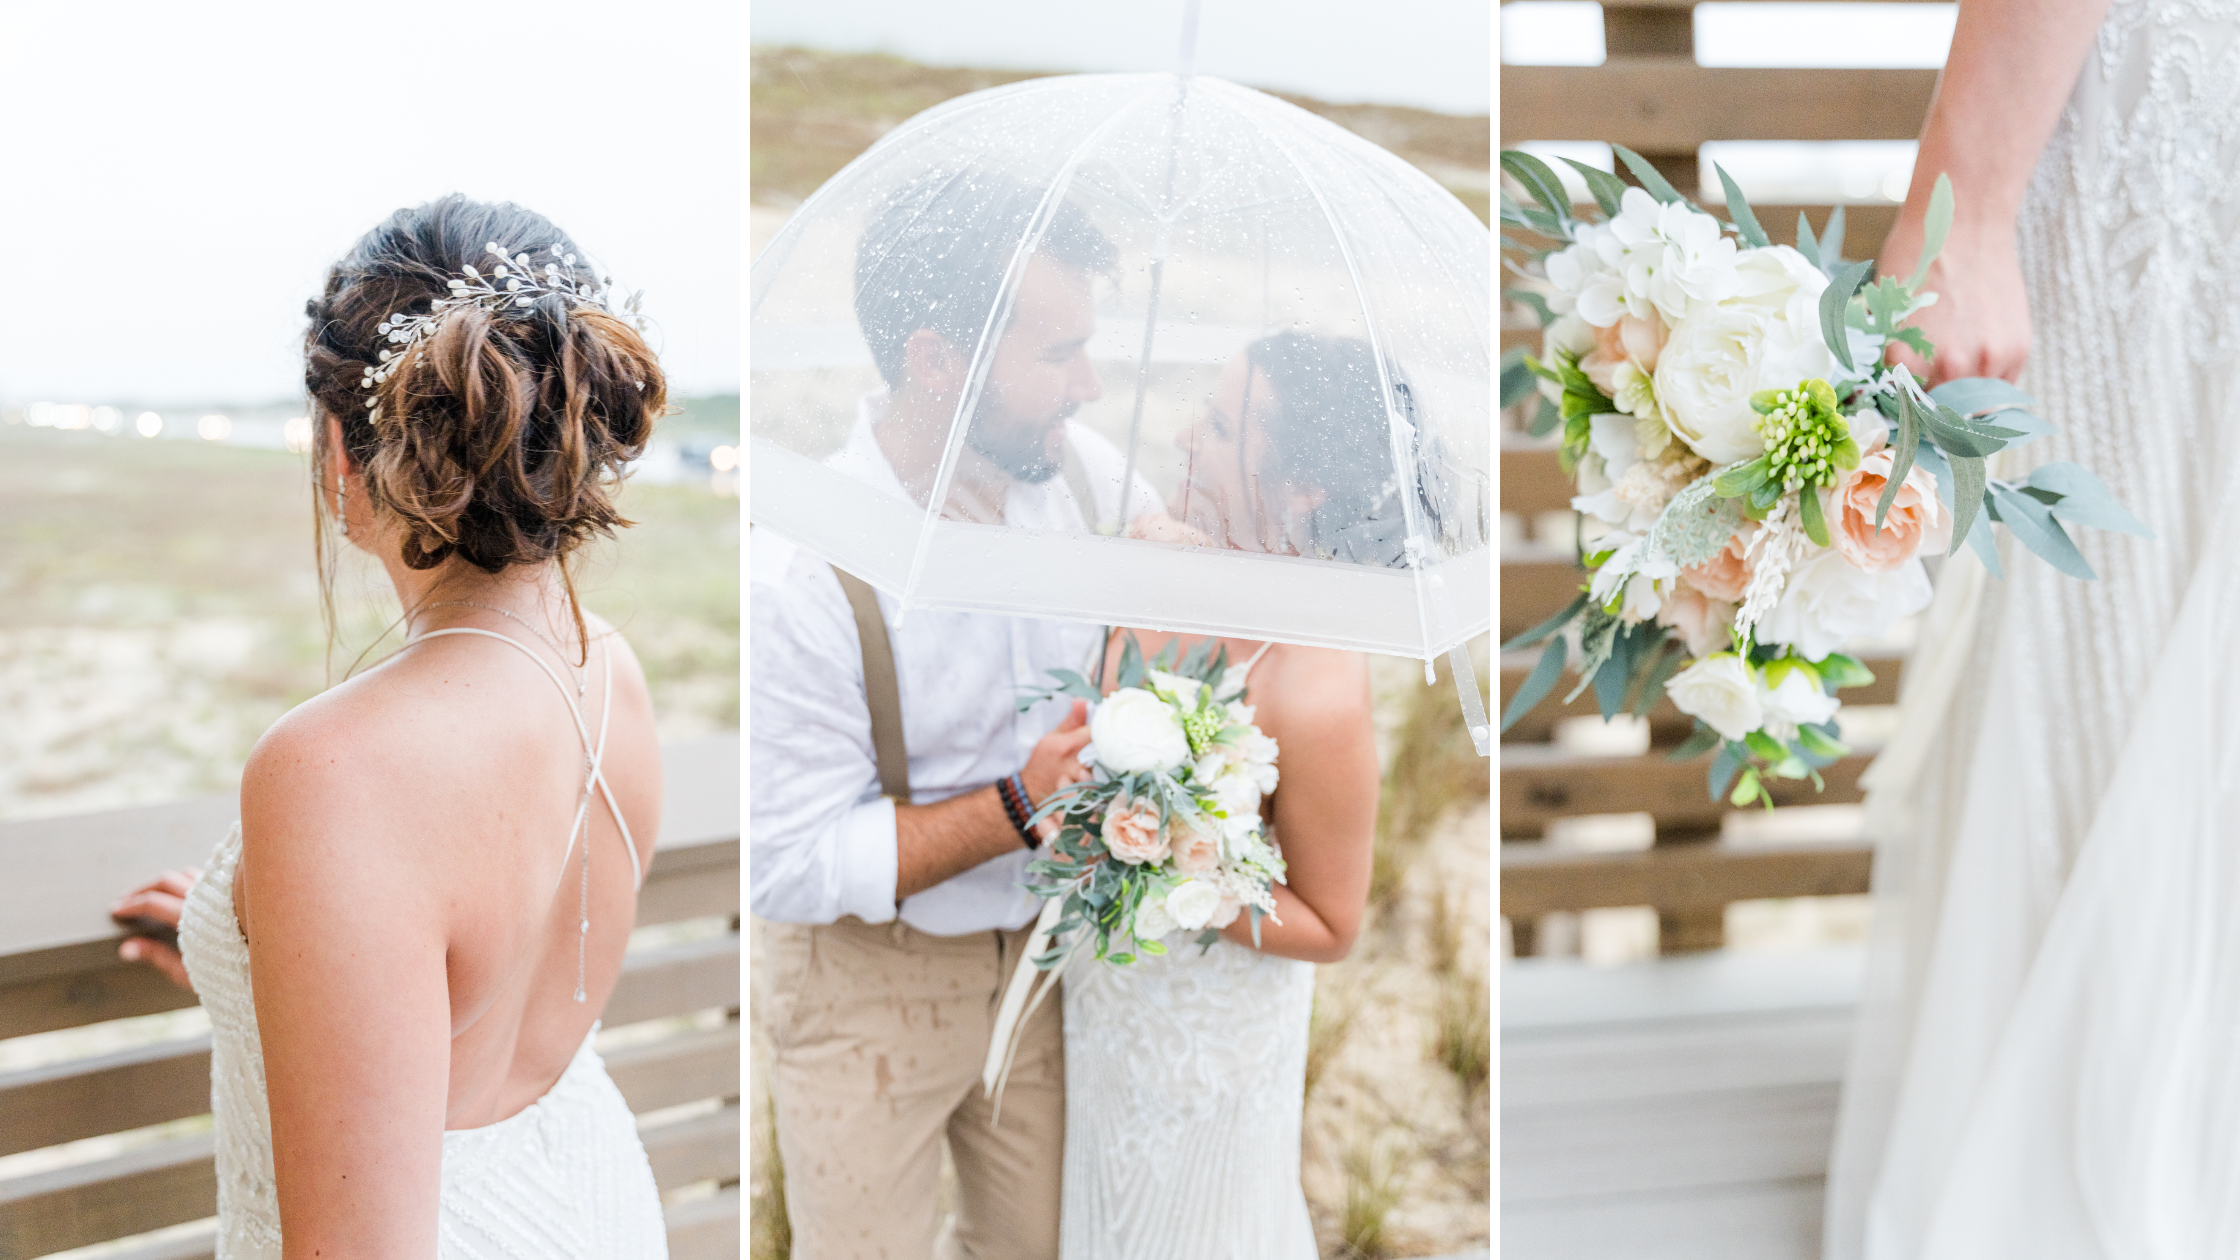 Rainy Gulf Shores Wedding Elopement Bride and Groom Portraits Photographed by Kristen Marcus Photography | Alabama Wedding Photographer